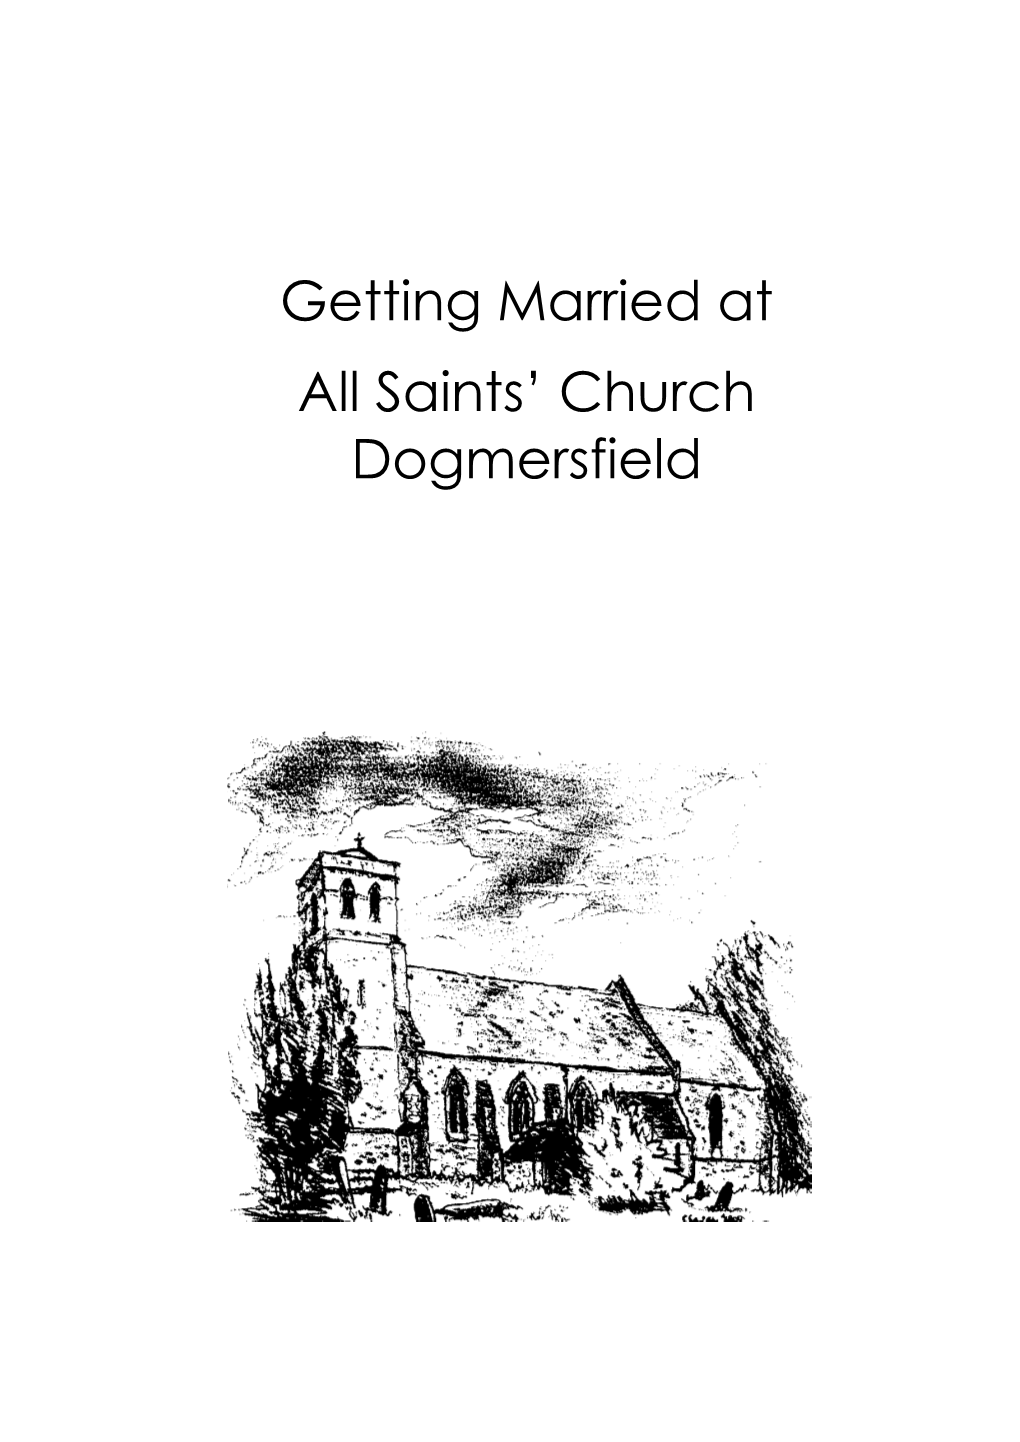 Getting Married at All Saints' Church Dogmersfield